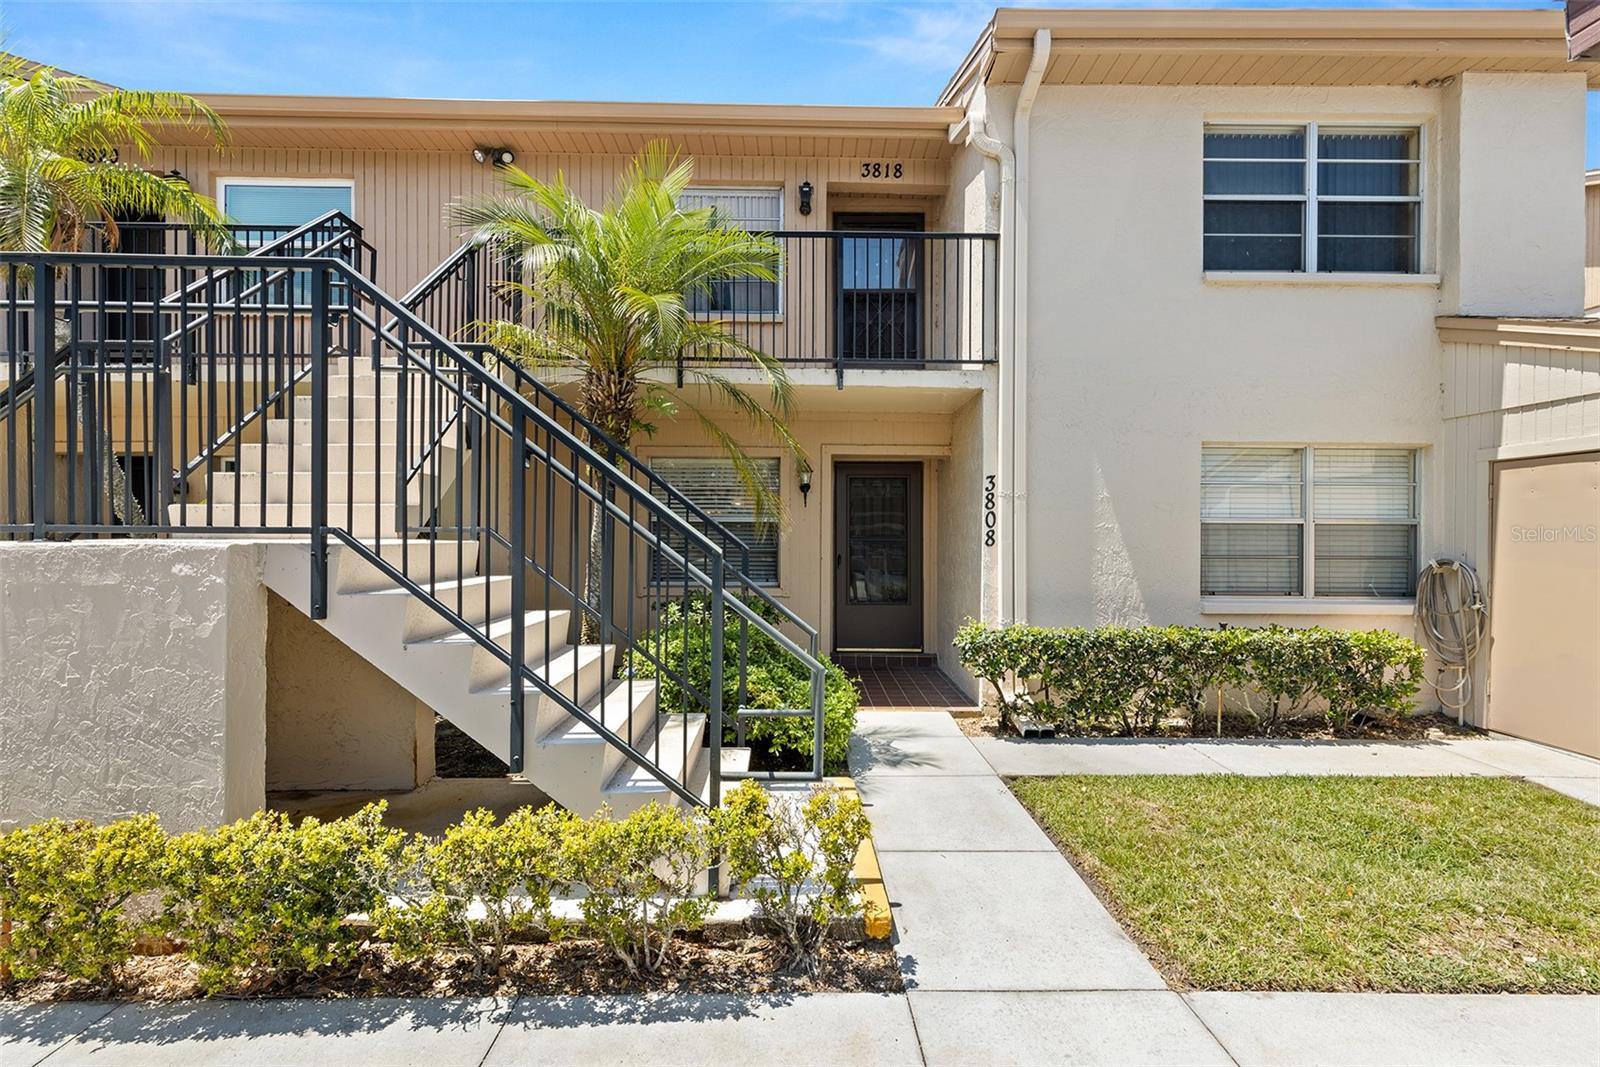 For sale: 3808 STAYSAIL LANE # 5, HOLIDAY FL 34691, HOLIDAY, FL